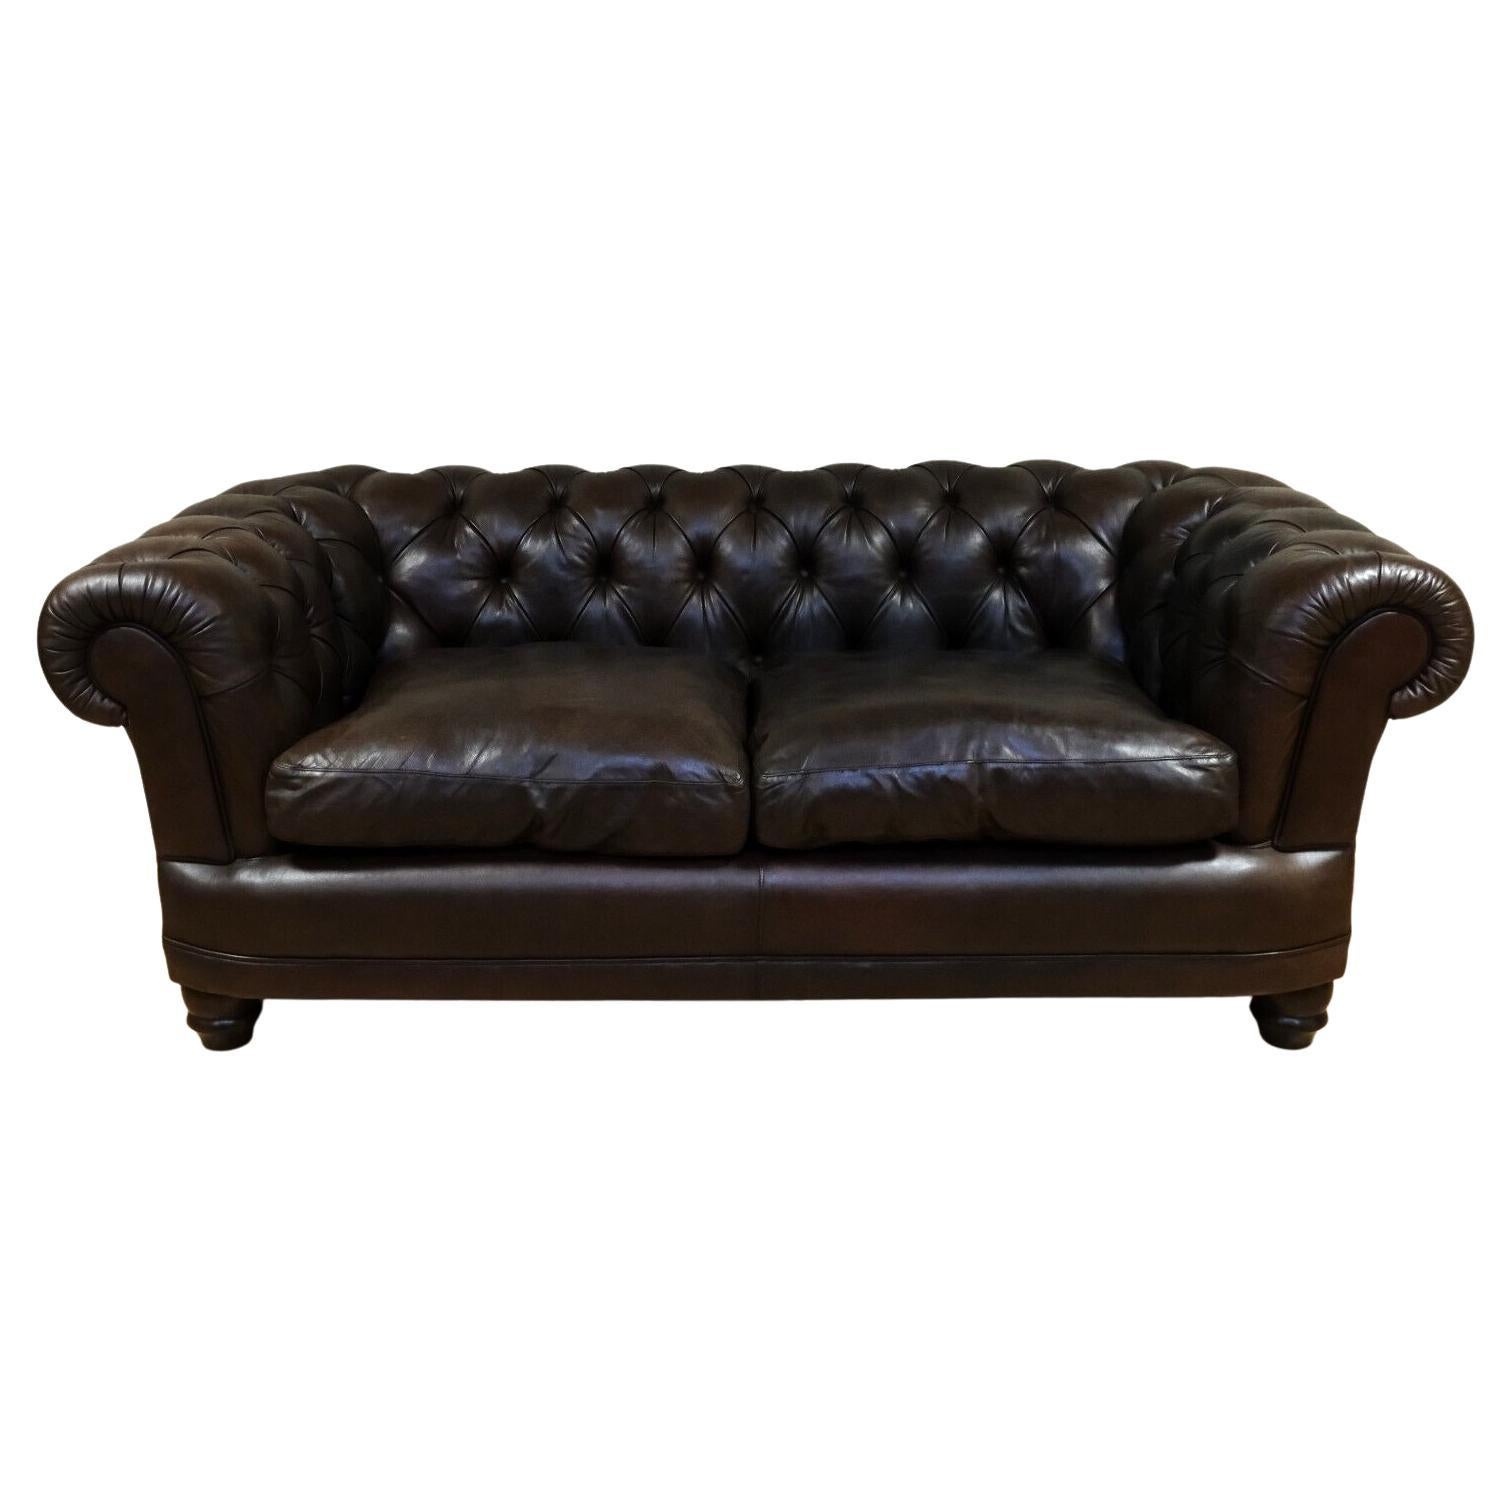 We are delighted to offer for sale this lovely Chesterfield two seater brown leather sofa with classic arms and feather filling.

This sofa is a classic and timeless piece of furniture. This piece features a distinctive rolled back and arms that